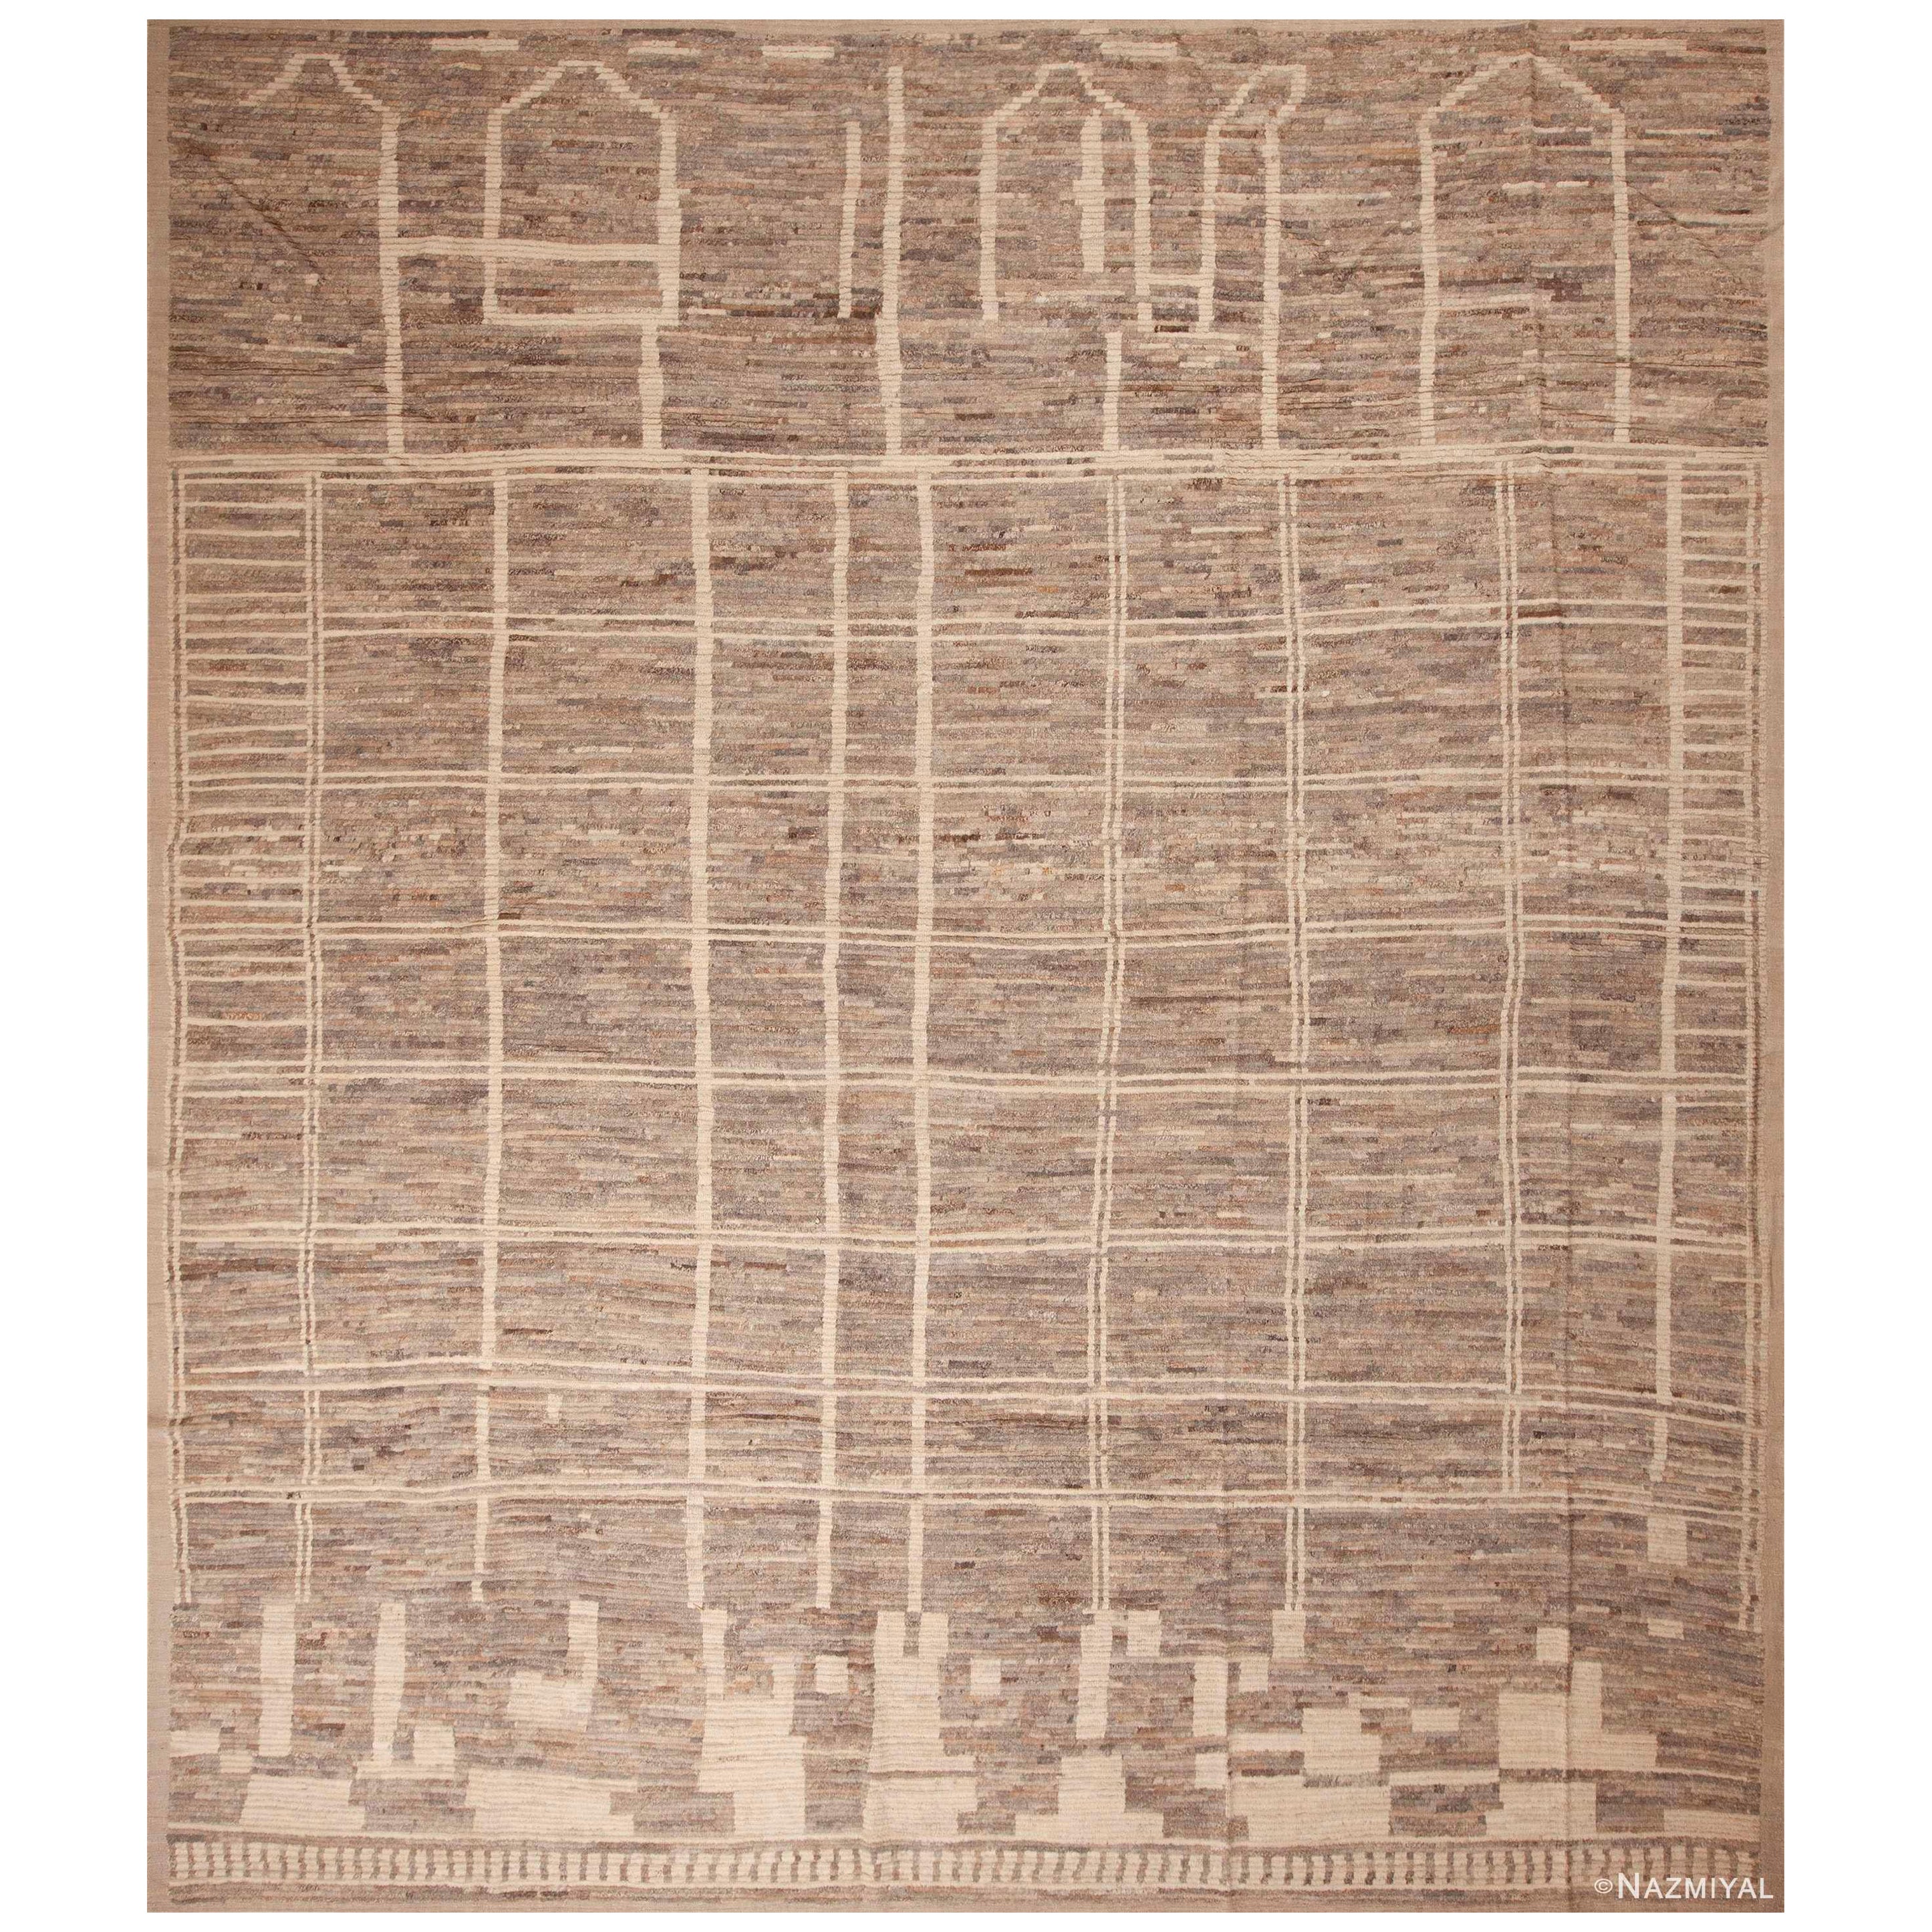 Nazmiyal Collection Large Size Earthy Grey Color Tribal Modern 13' x 15' For Sale